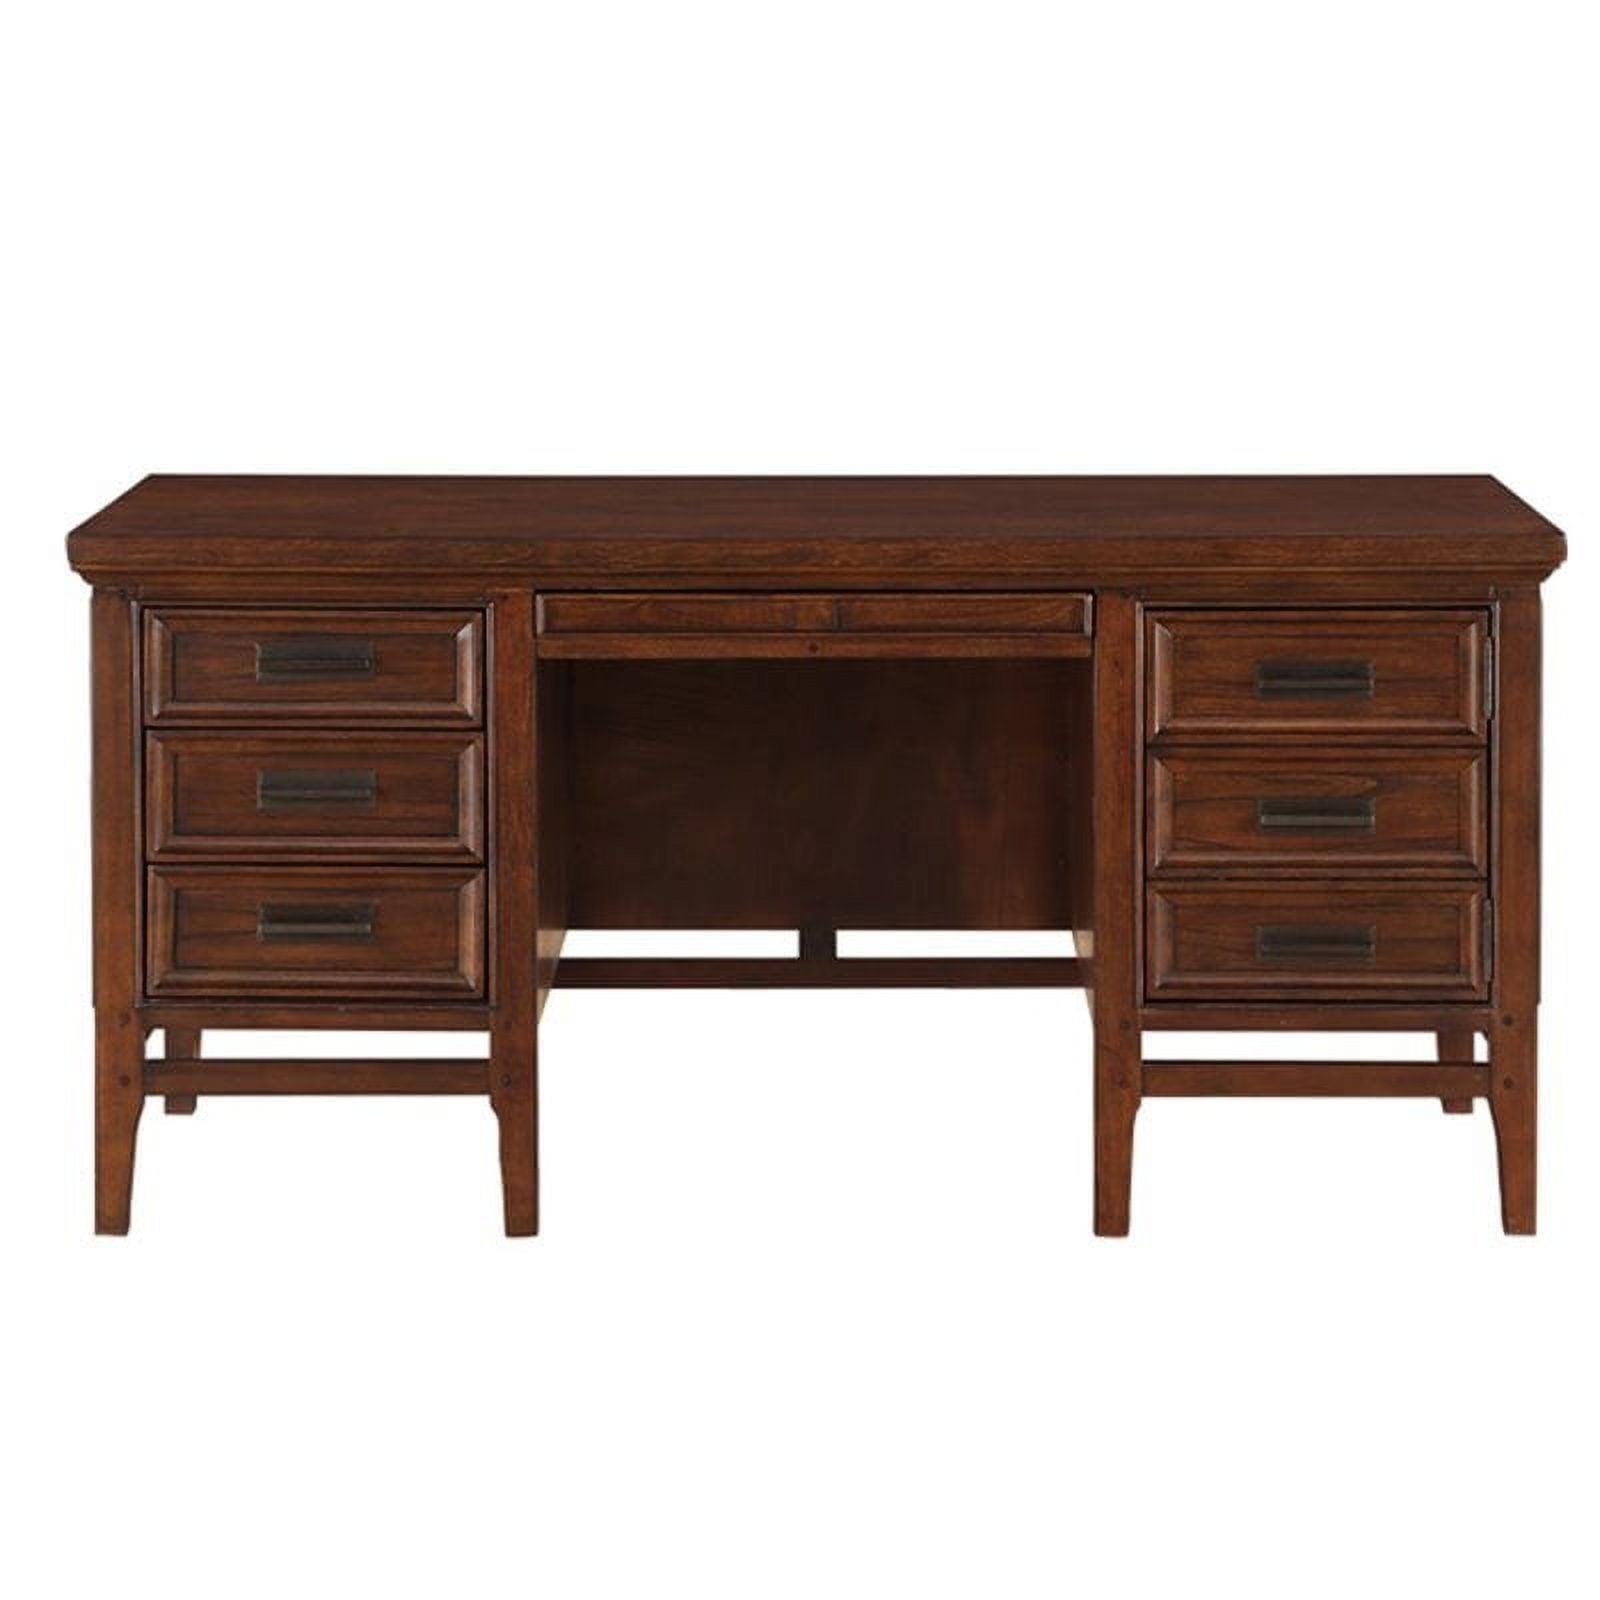 Transitional Brown Cherry Executive Desk with Filing Cabinet and Drawers